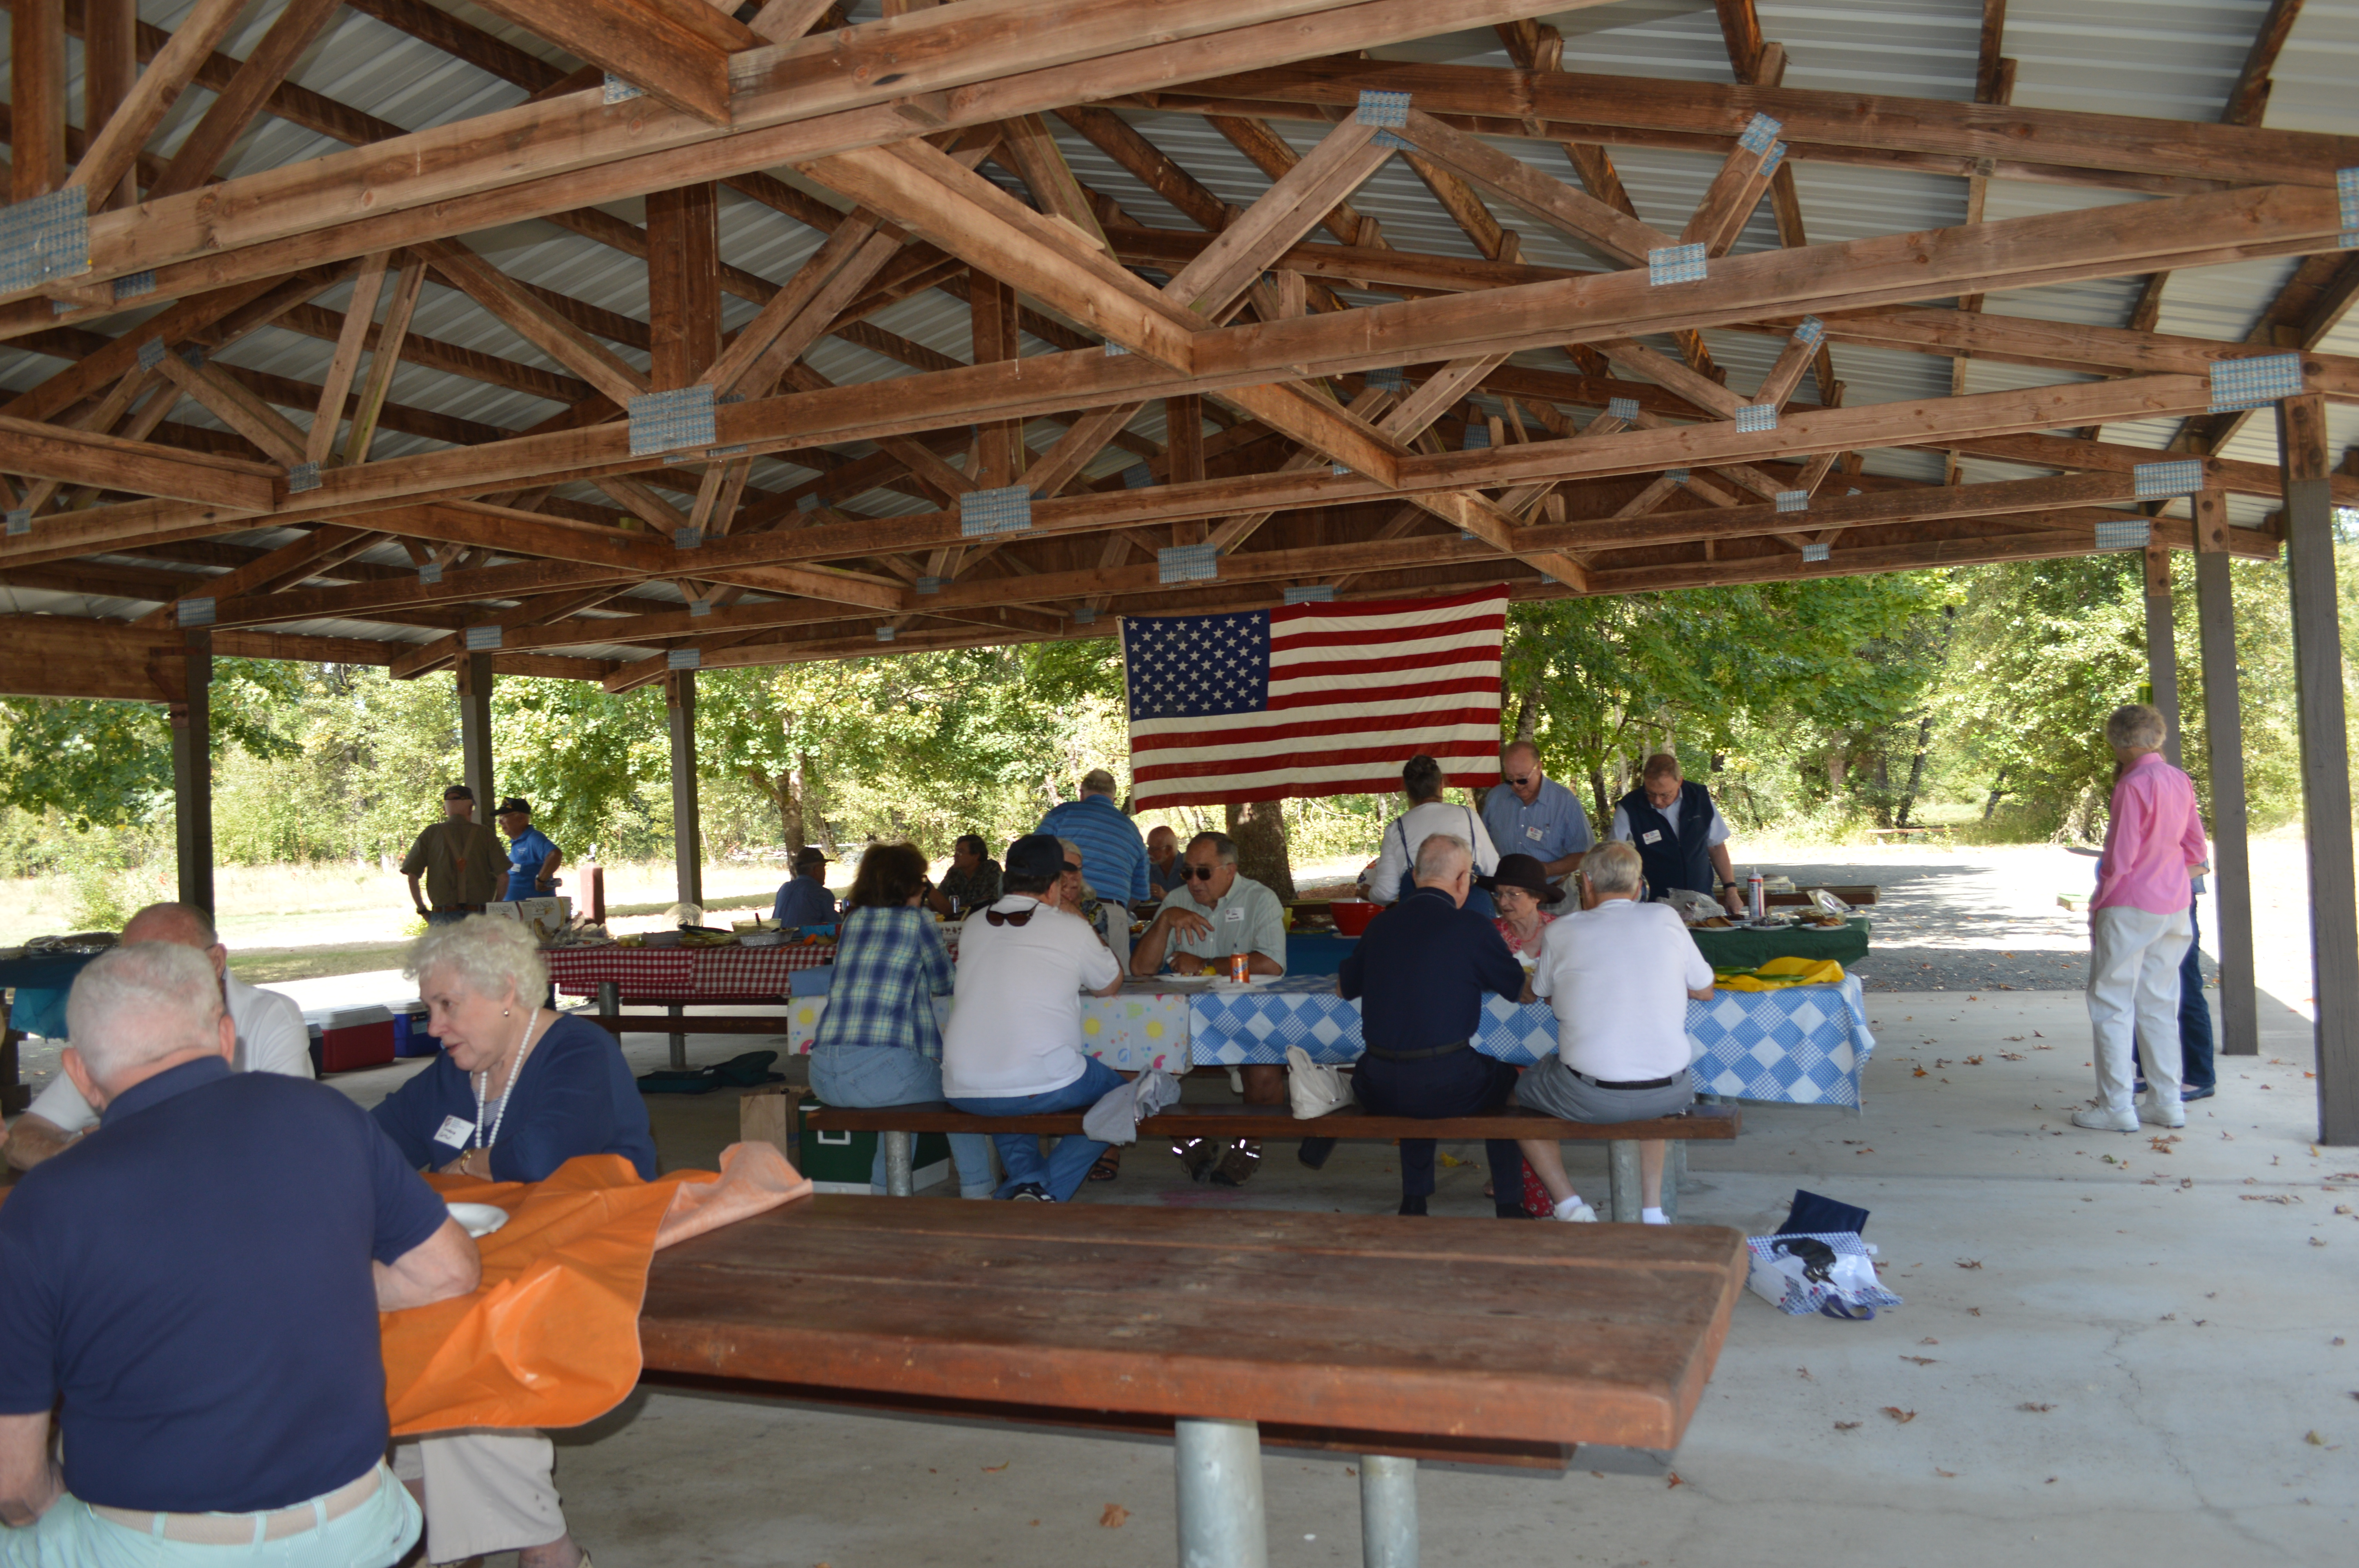 The Eugene chapter of the Military Officers Association of America holds monthly lunches (not July and August), and in September they hold a picnic at Jasper Park in Pleasant Hill for members and their families. Photo by Vanessa Salvia.